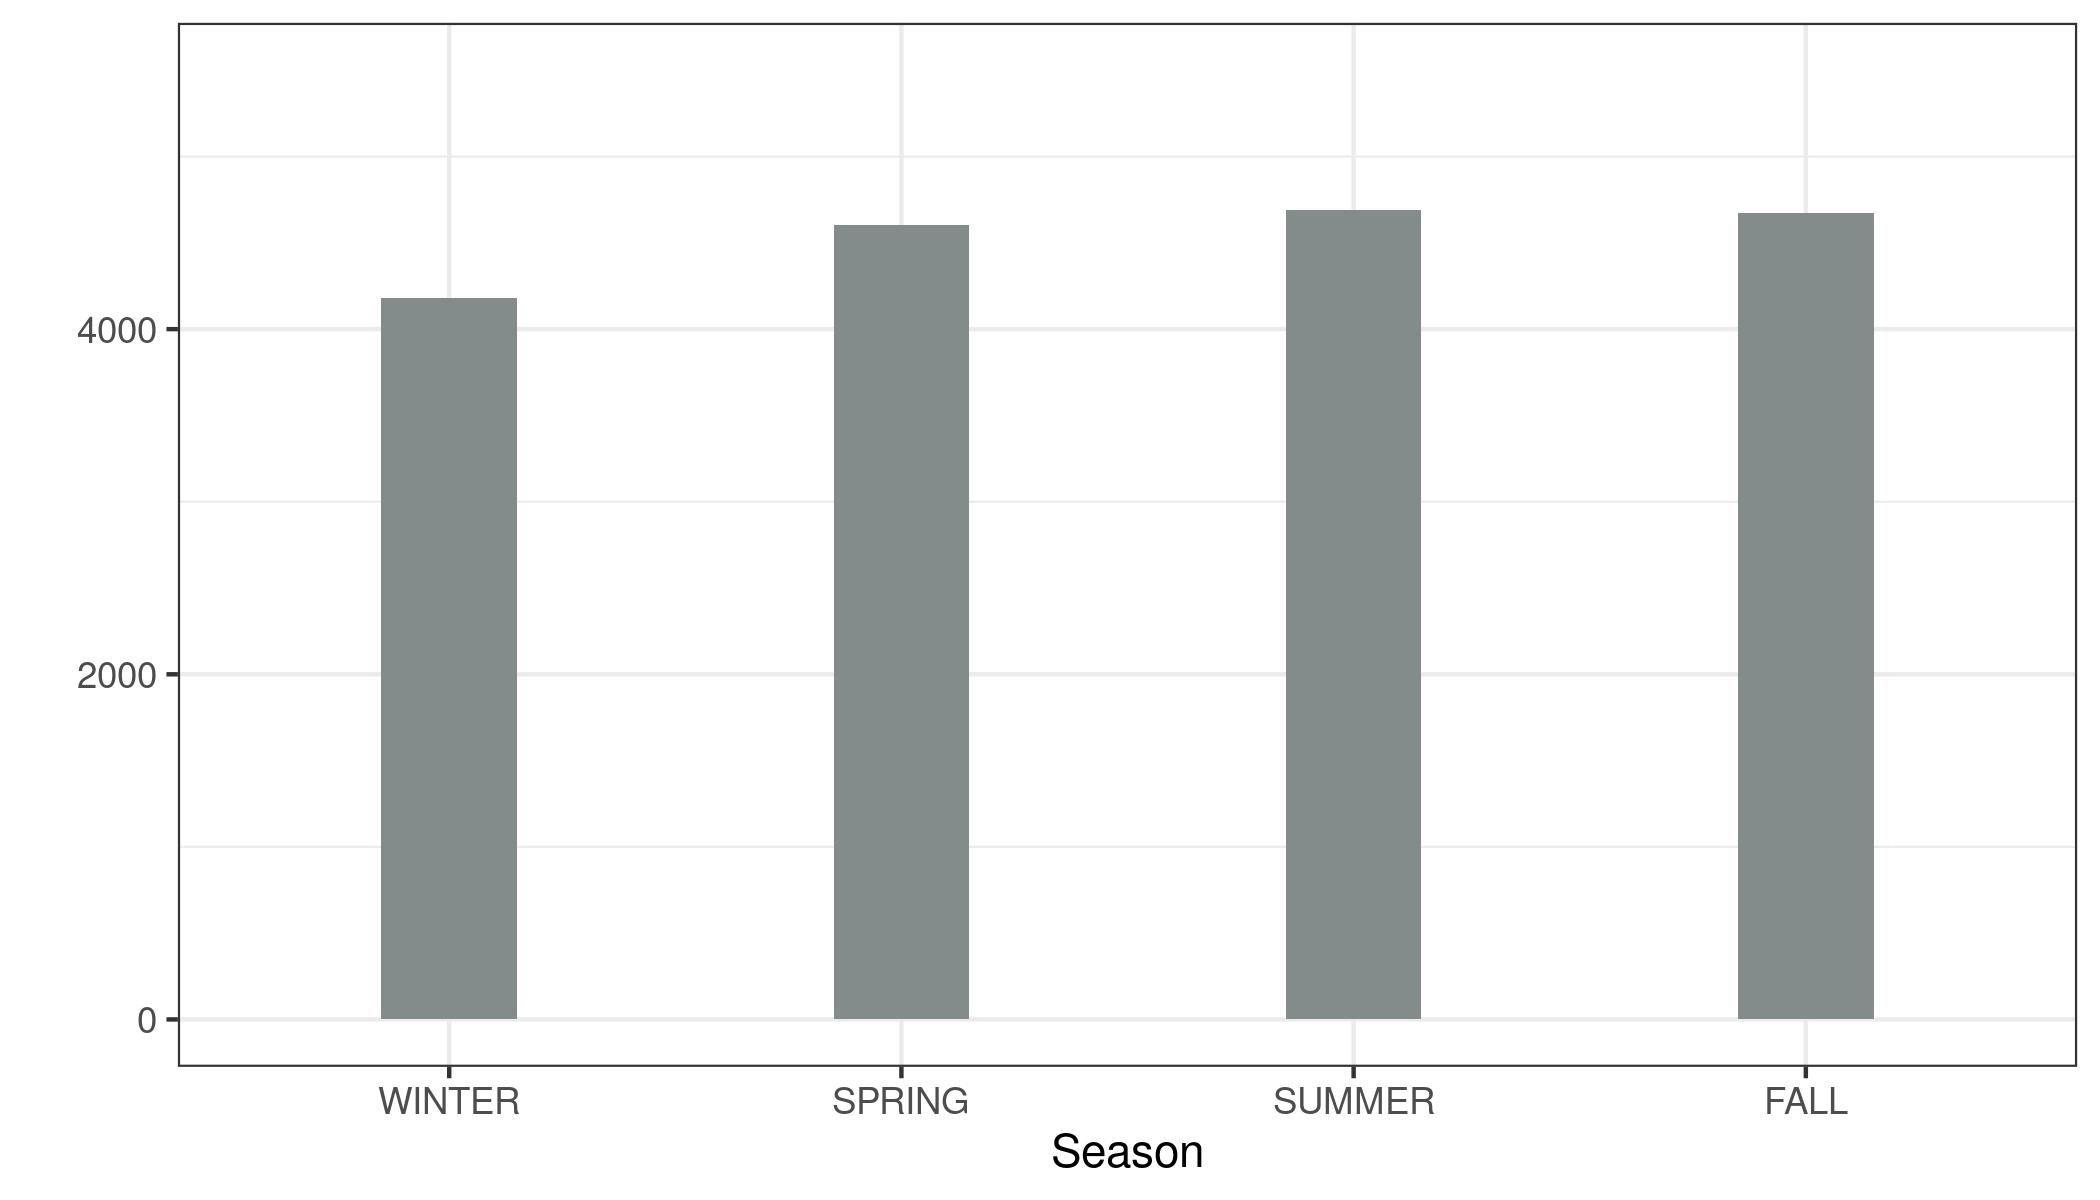 PDPs for the bike count prediction model and the season. Unexpectedly all seasons show similar effect on the model predictions, only for winter the model predicts fewer bicycle rentals.